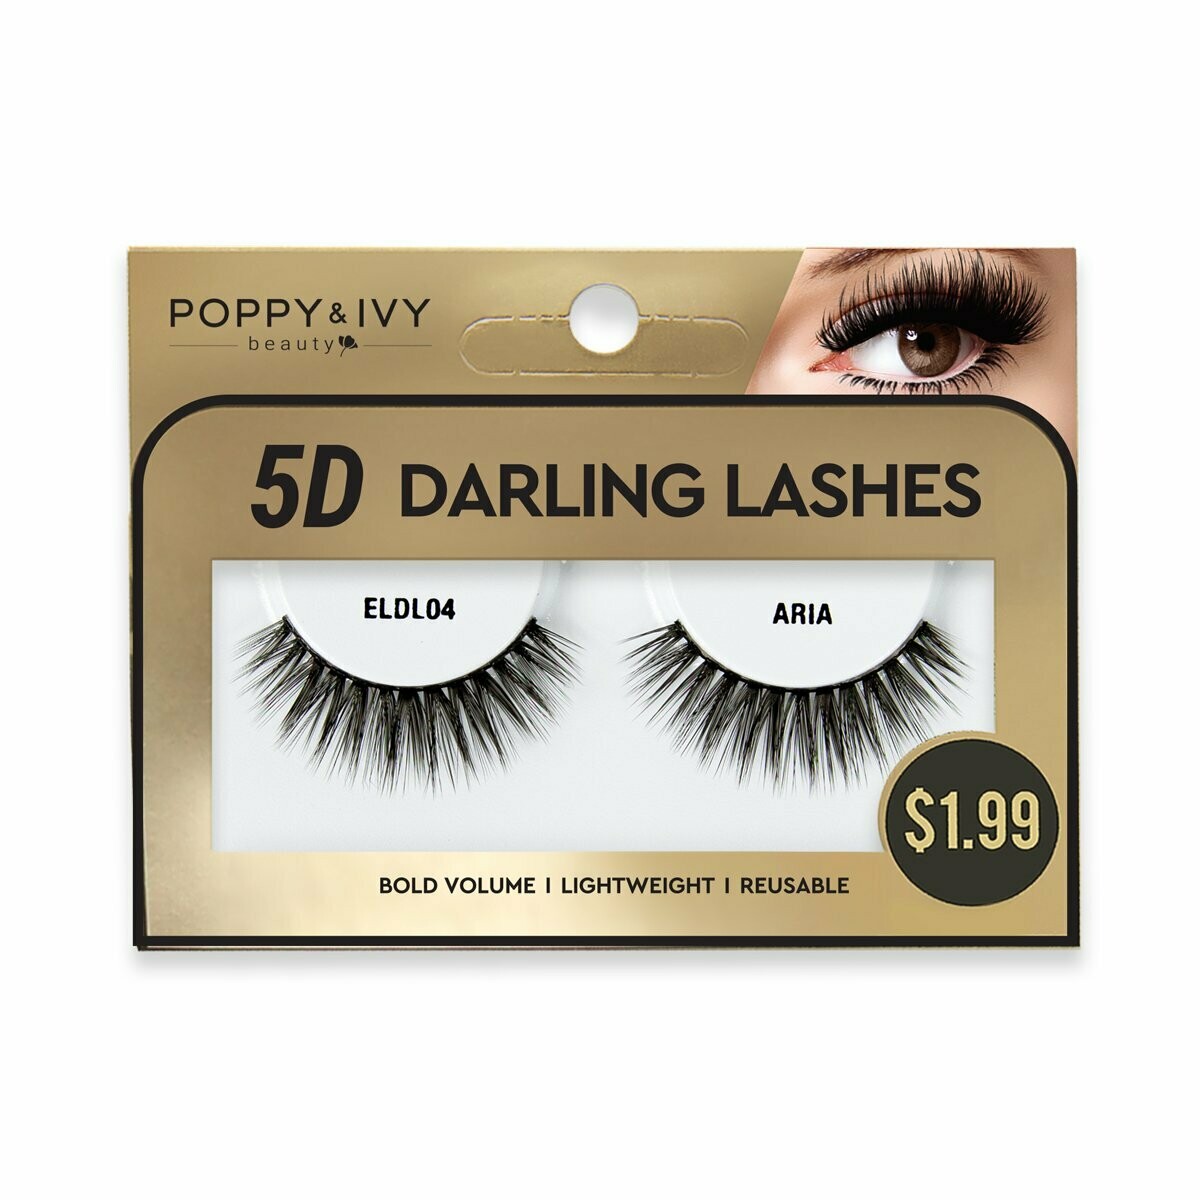 ABSOLUTE 5D DARLING LASHES ELDL04 - ARIA